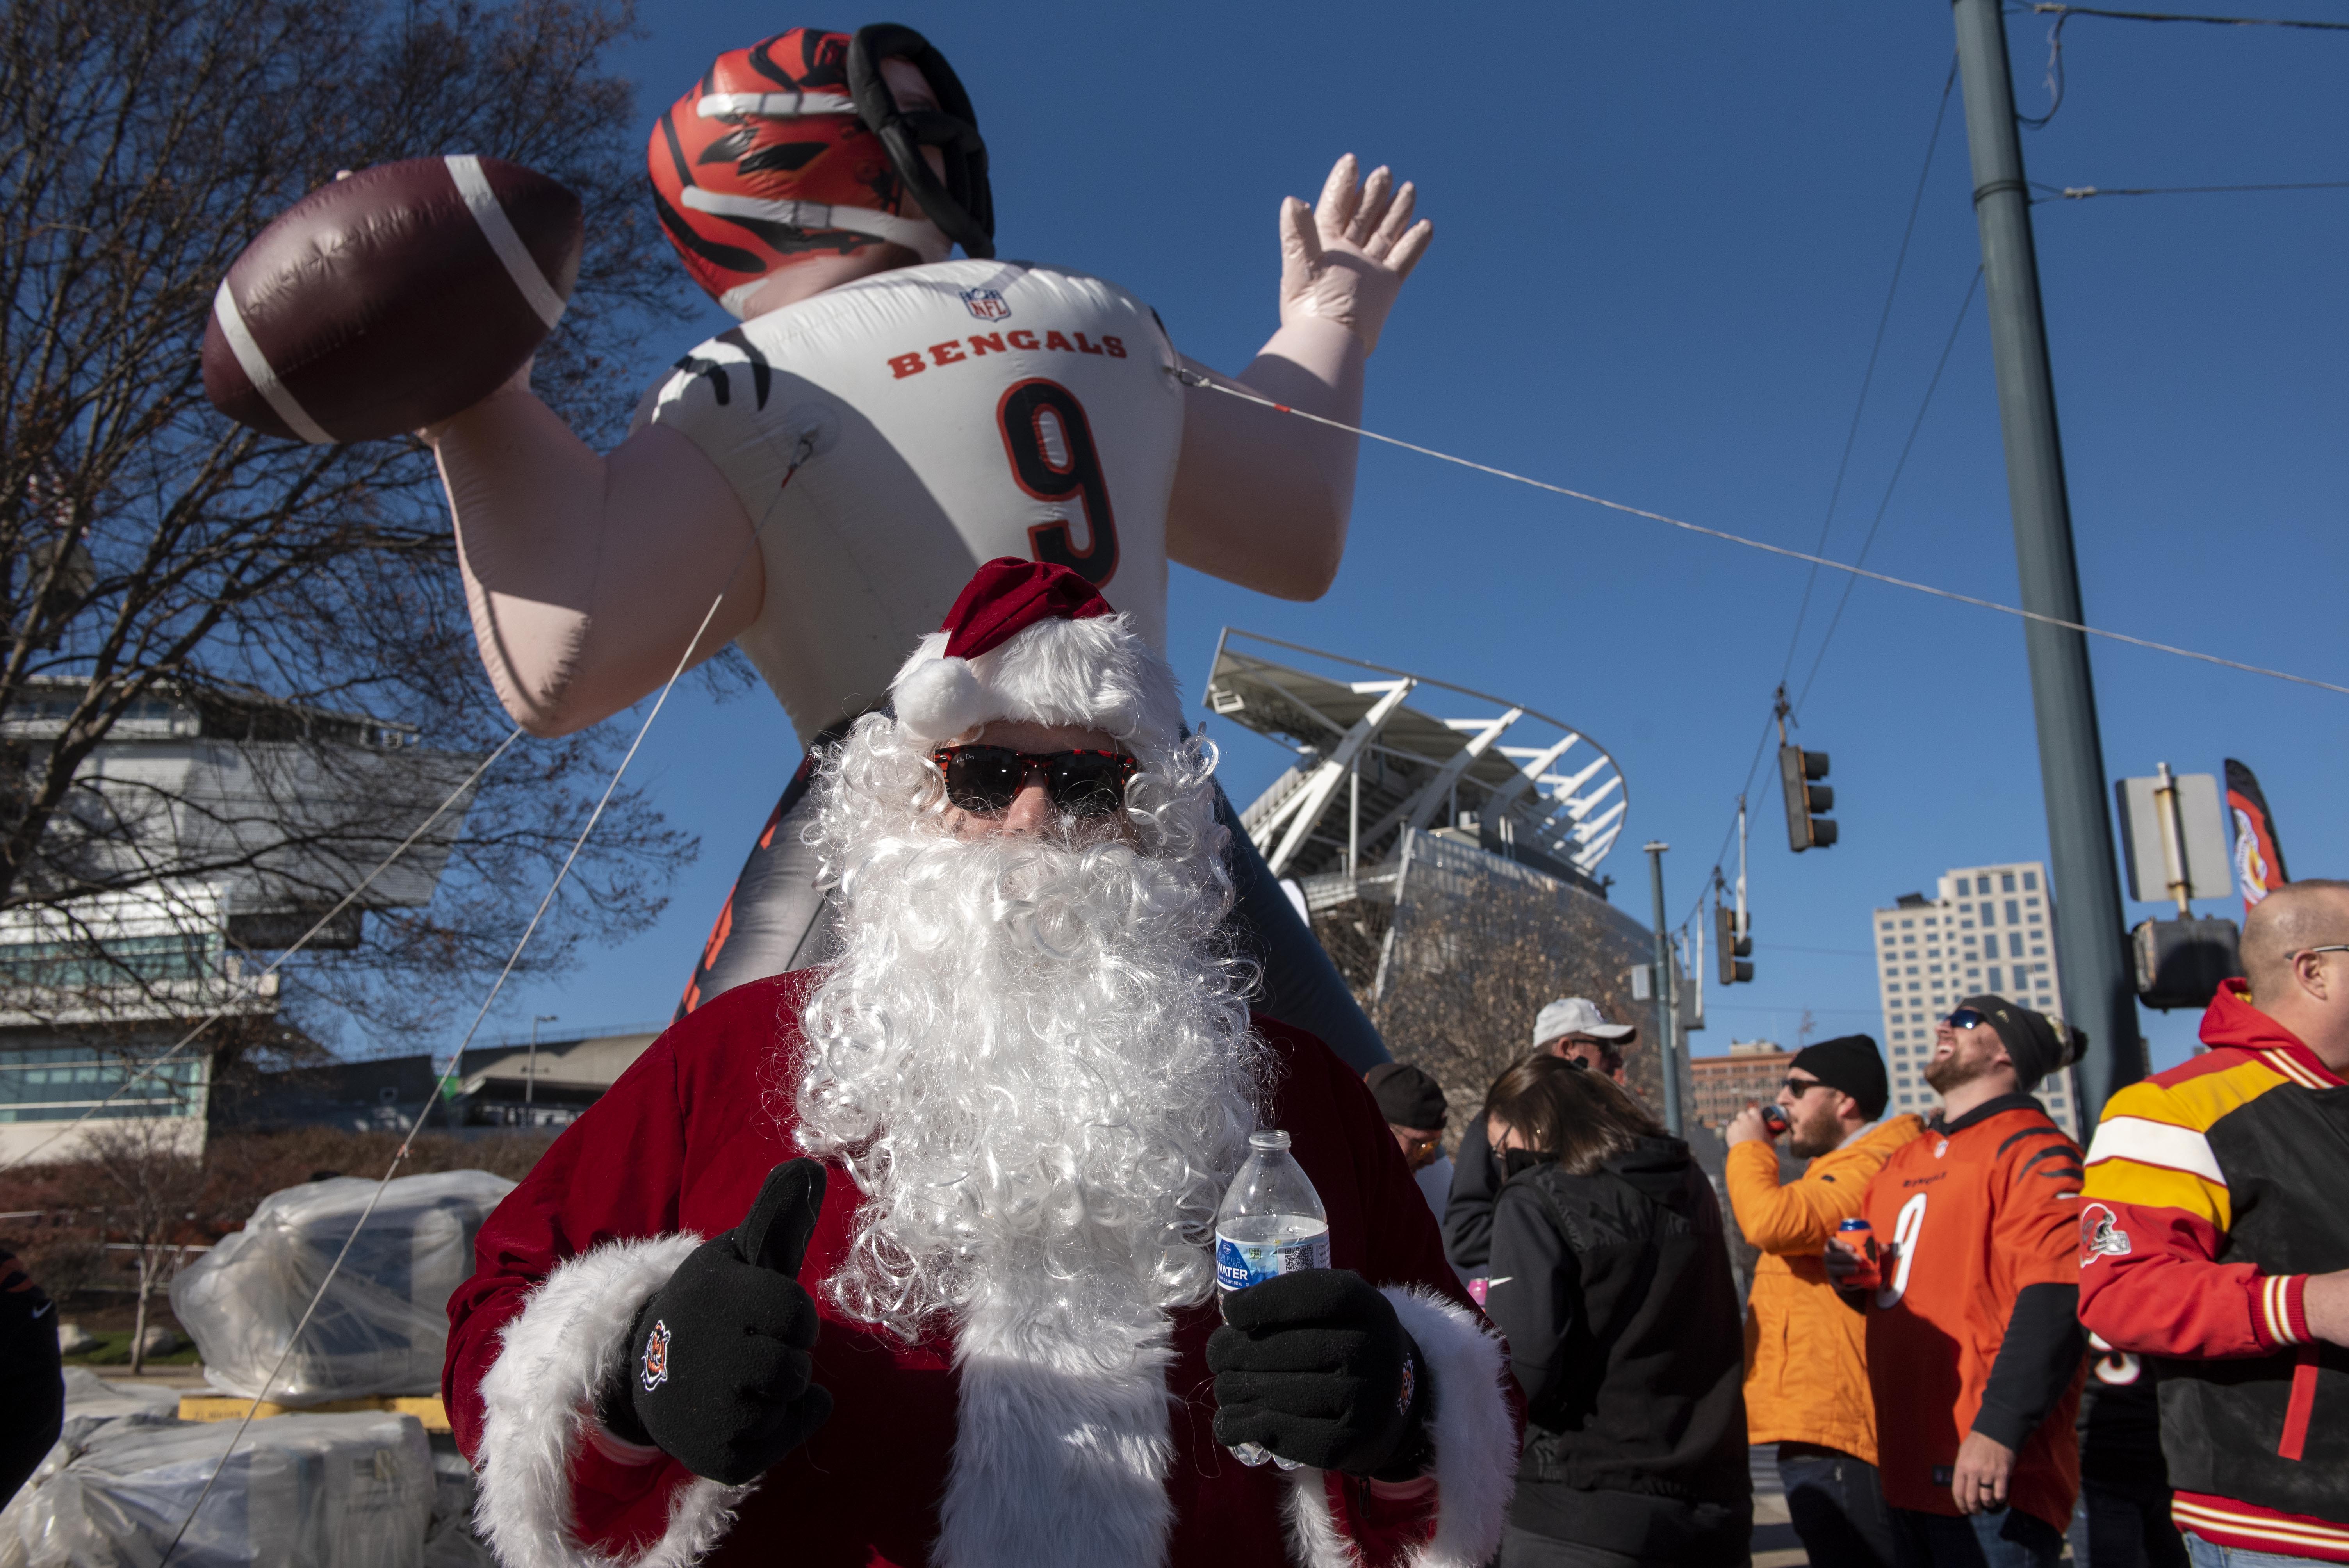 Cincinnati Bengals 2-Point Conversion: Some Christmas and Holiday Fun - Sports Illustrated